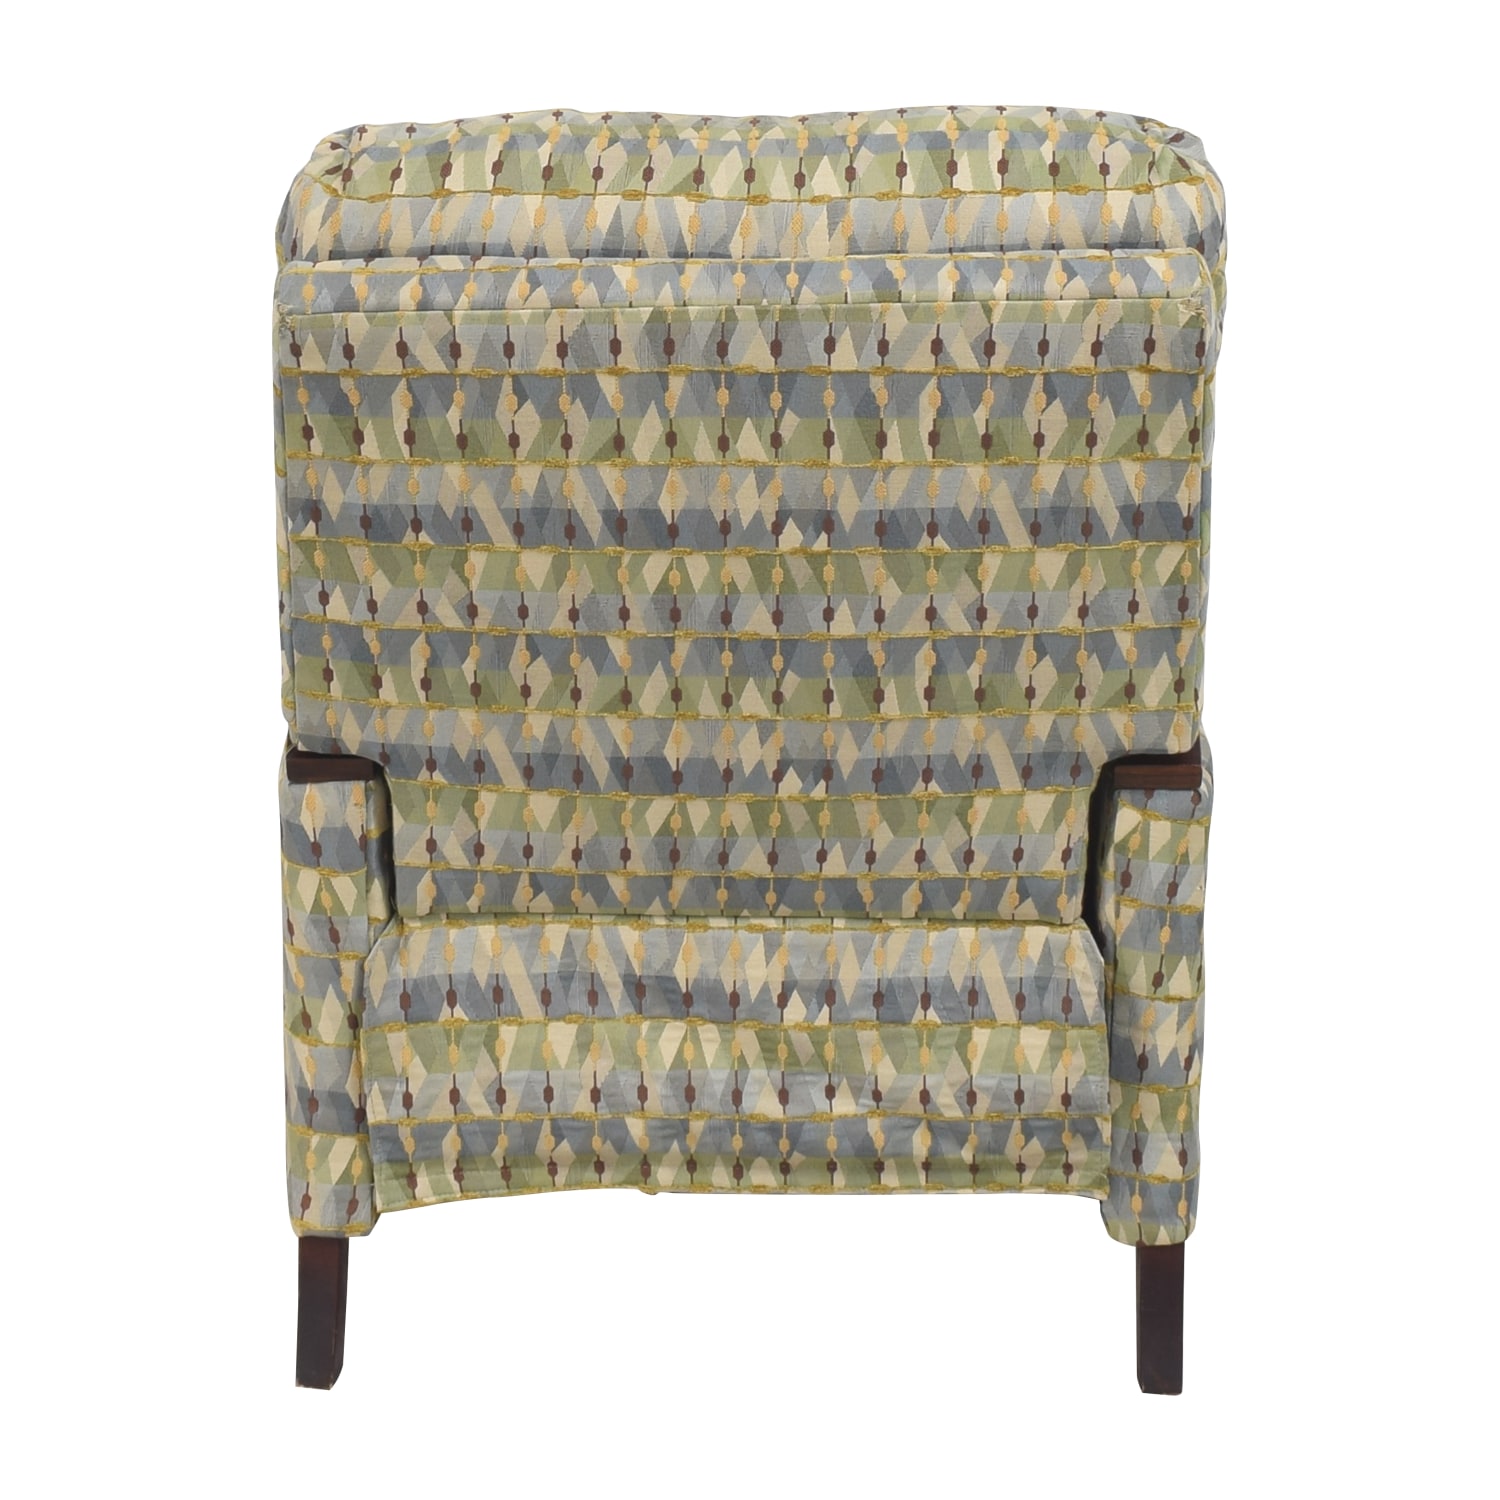 Raymour & Flanigan Raymour & Flanigan Patterned Recliner pa